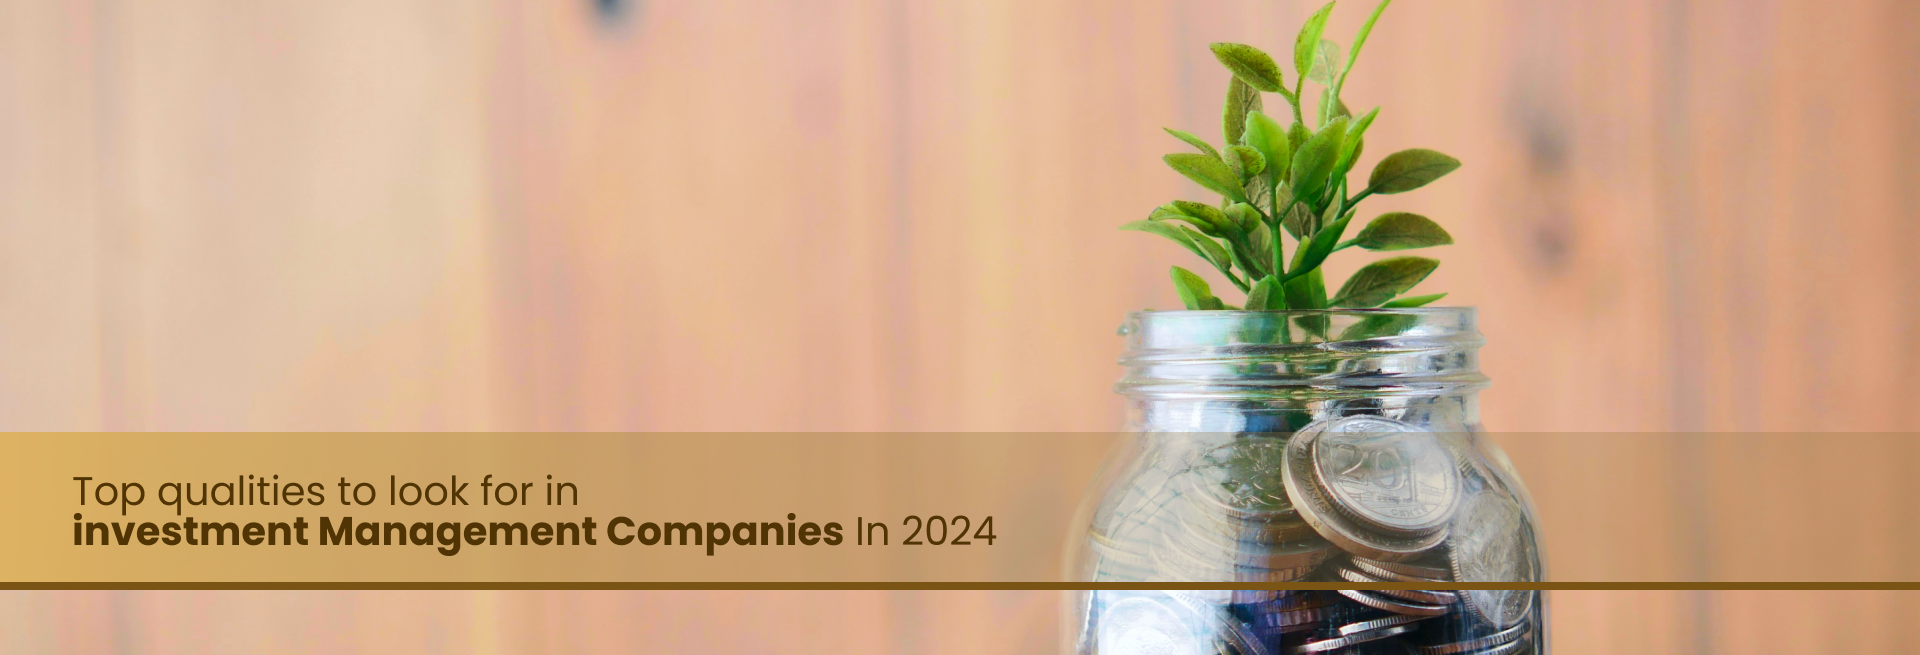 Top Qualities To Look For In Investment Management Companies In 2024